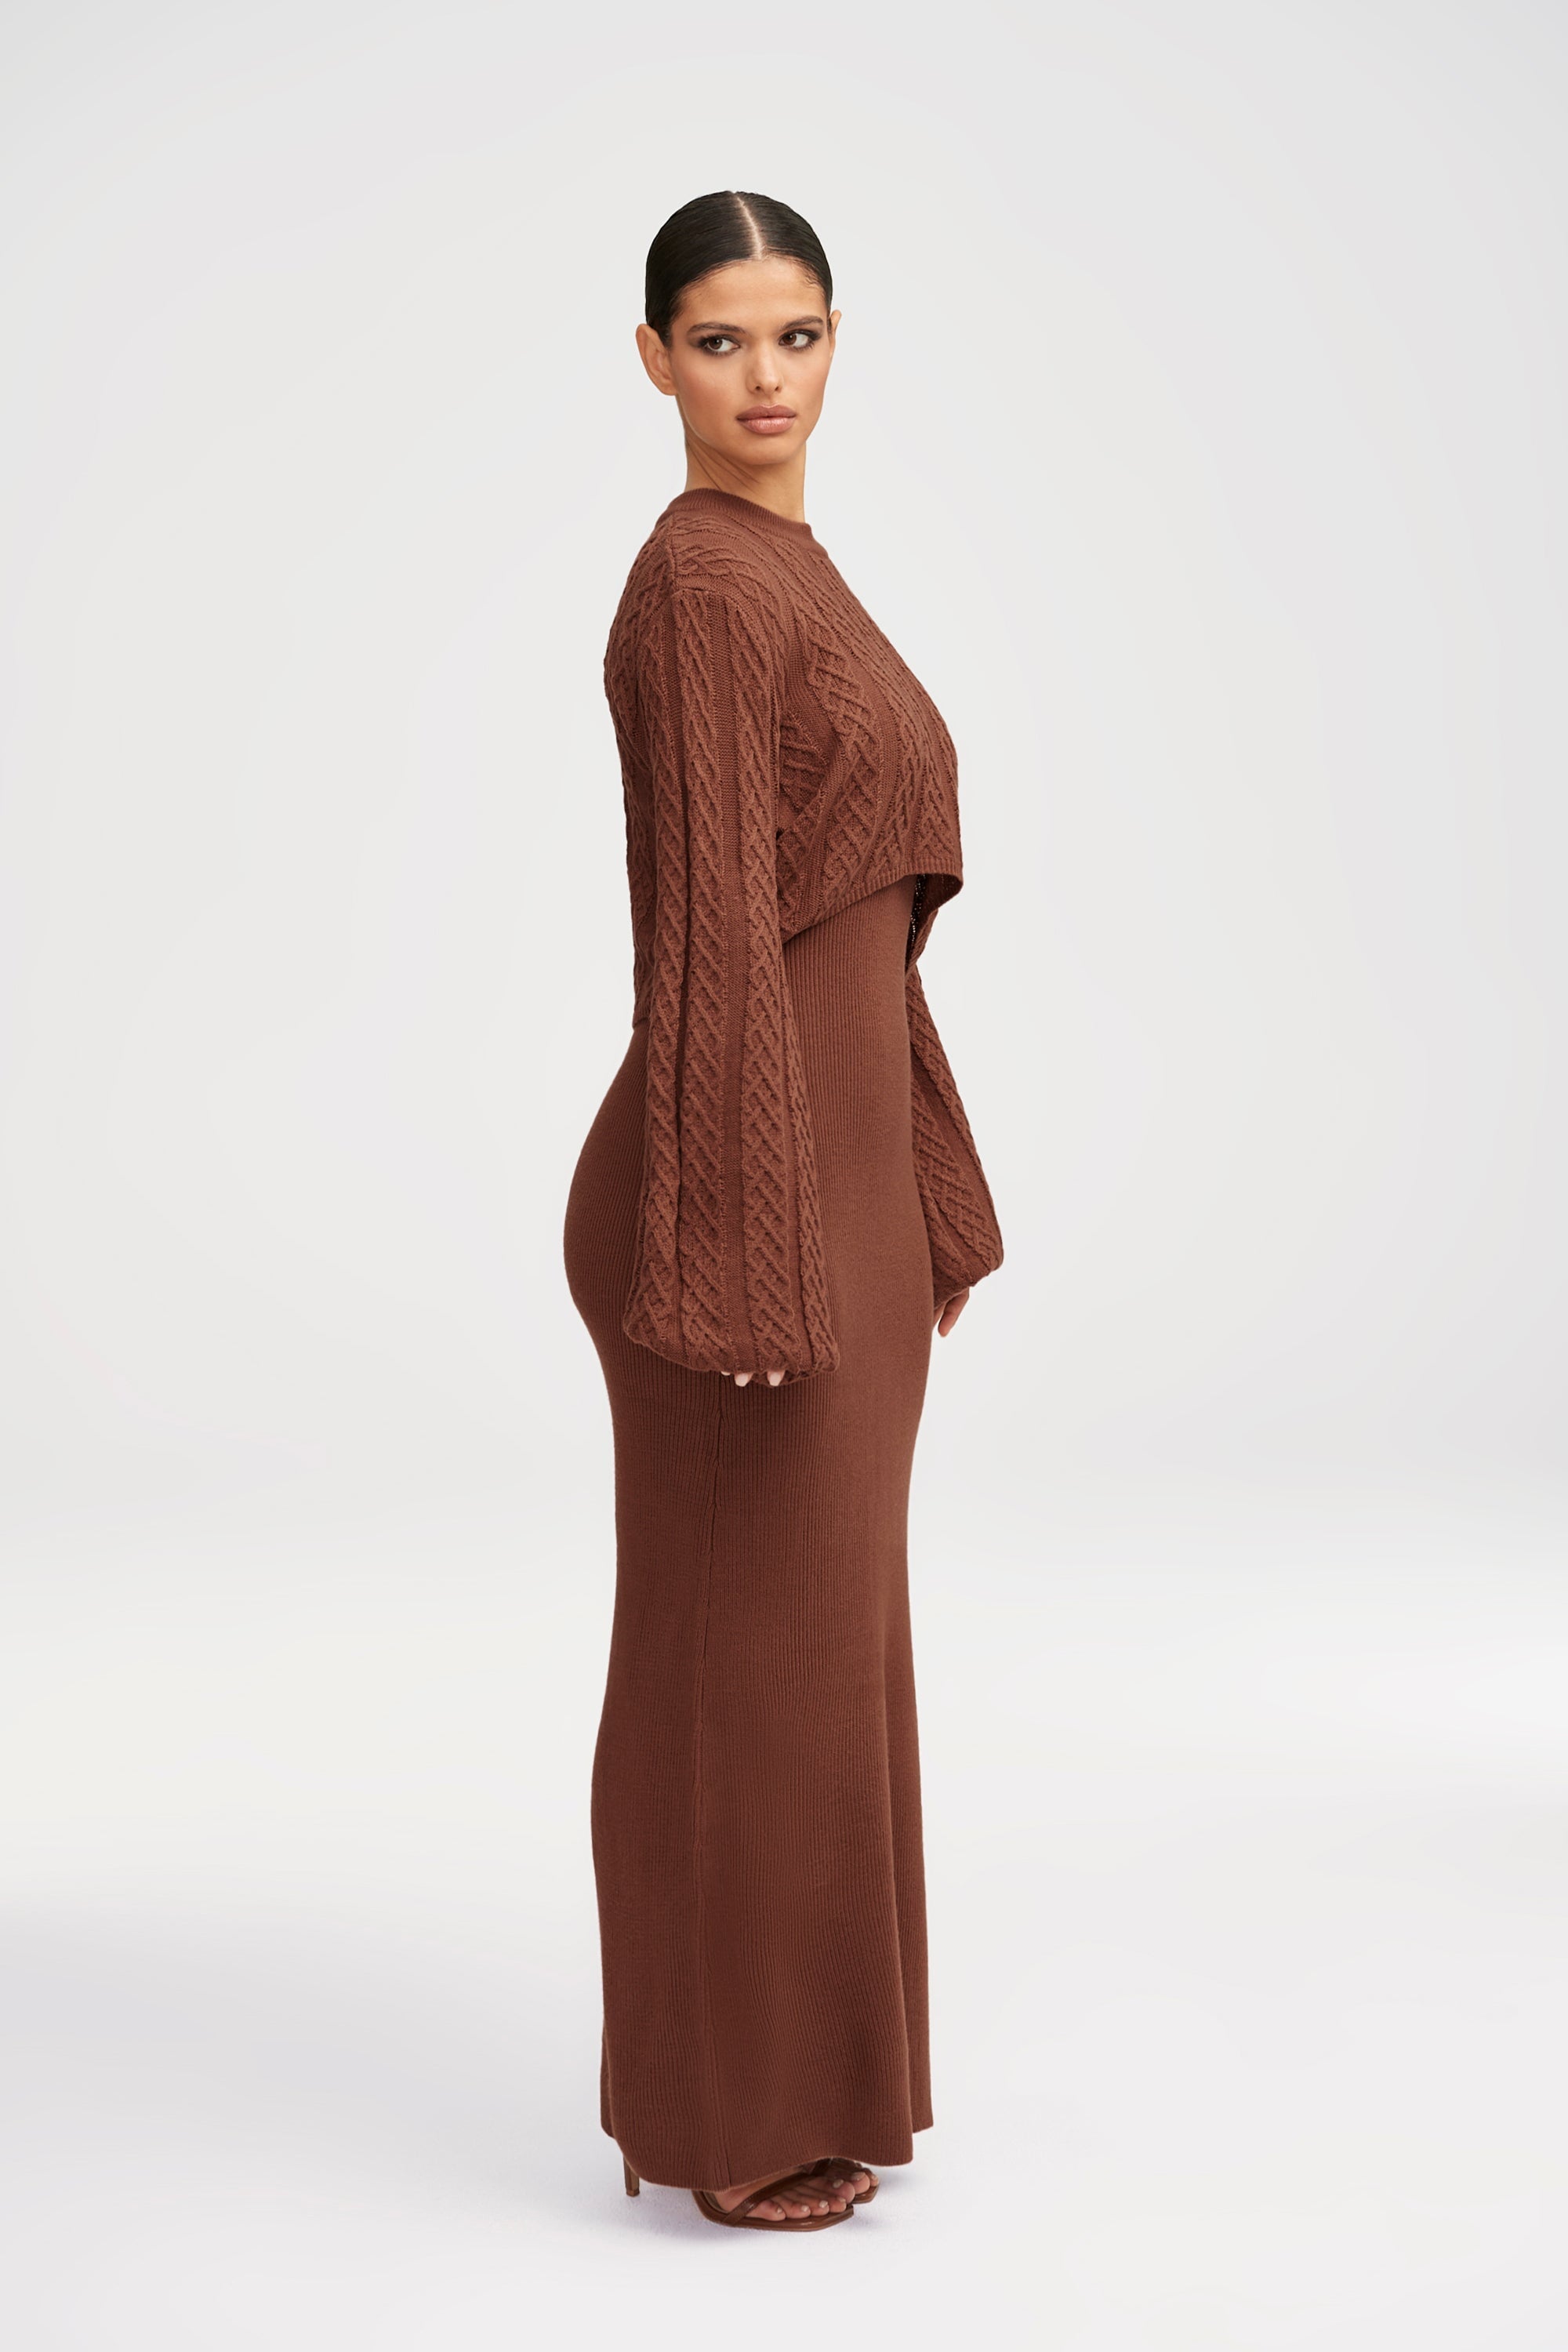 Heather Knit Maxi Dress and Top Set Clothing epschoolboard 